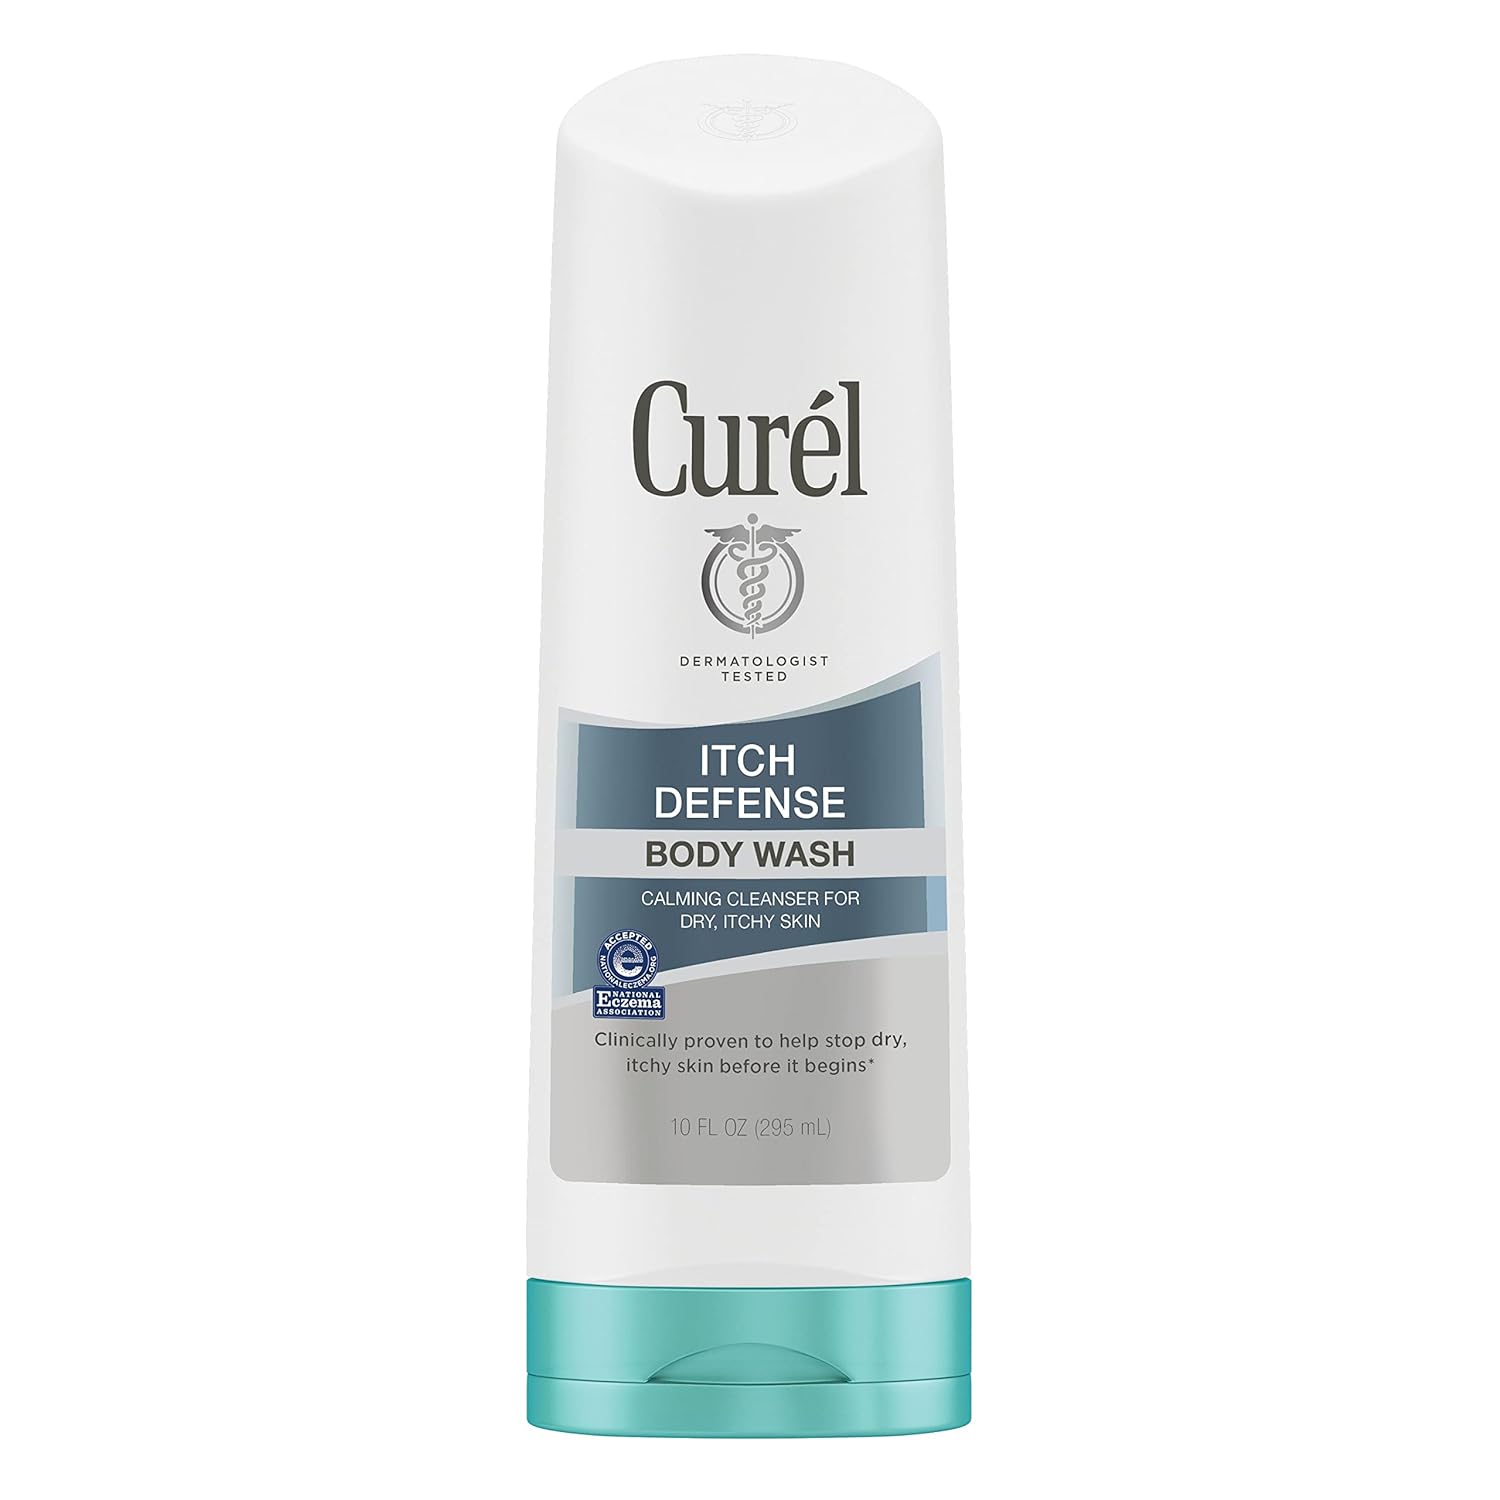 Curel Itch Defense Calming Daily Cleanser, Body Wash, Soap-free Formula, for Dry, Itchy Skin, 10 oz,